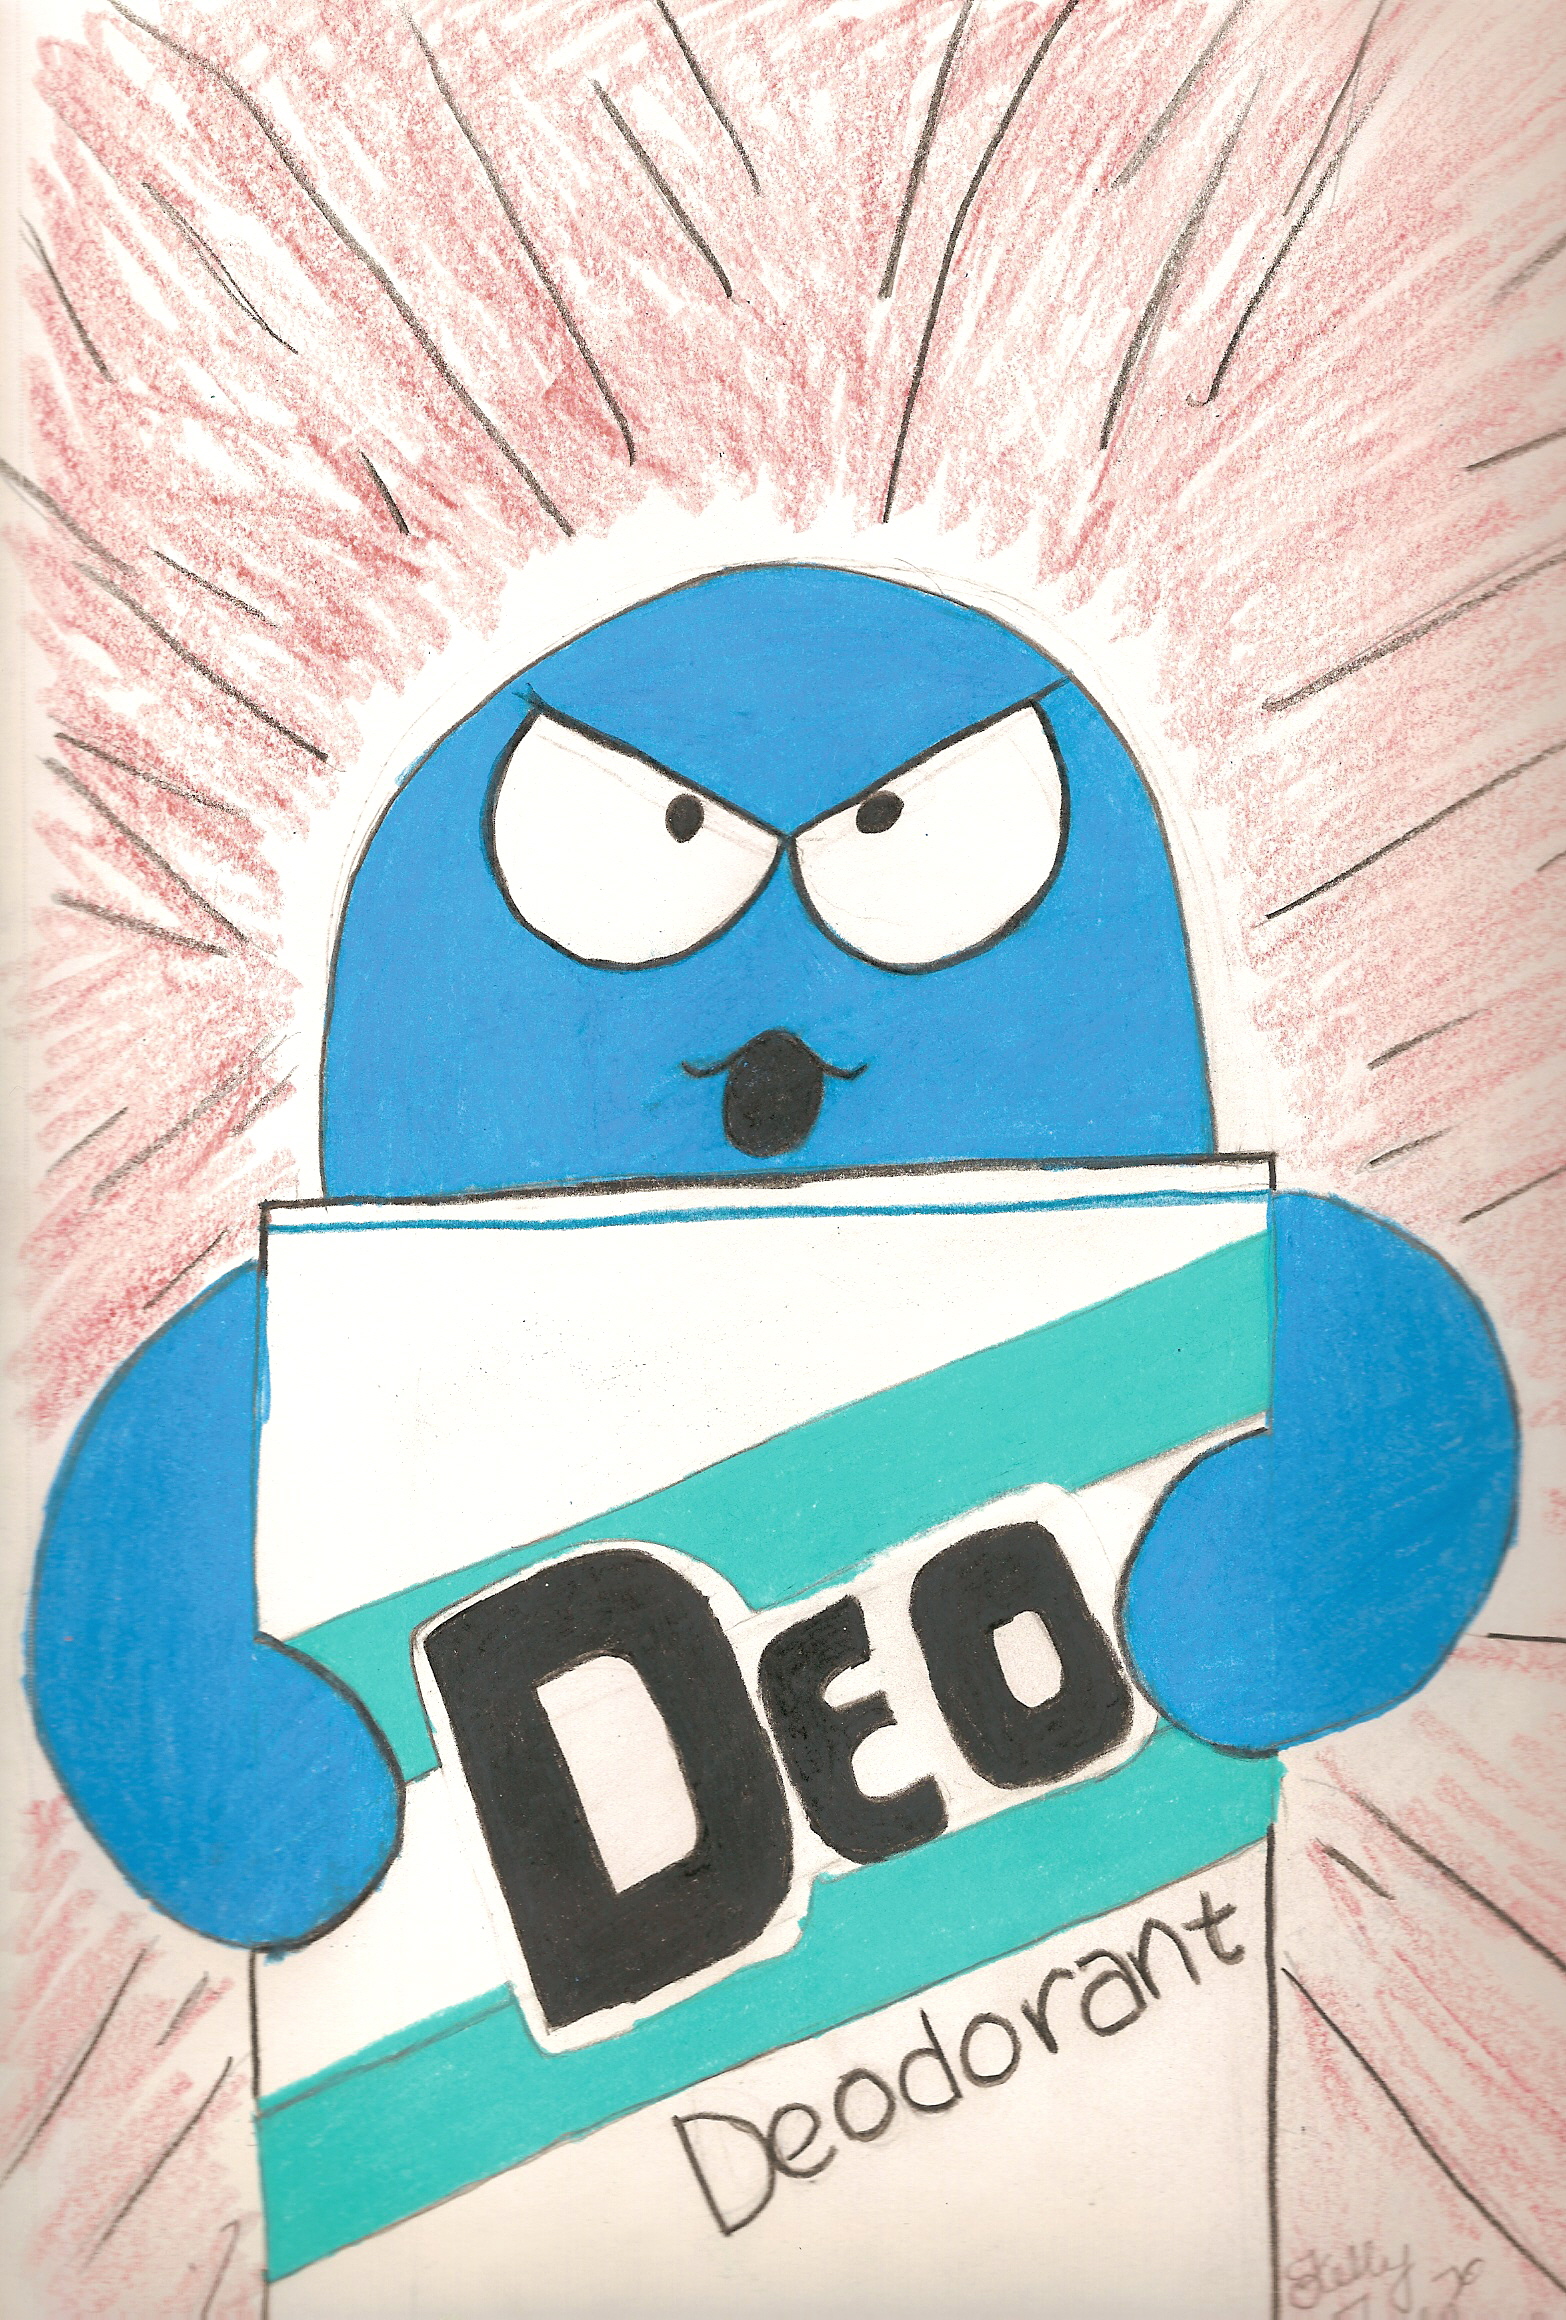 Bloo as Deo by Ladylovelace10101